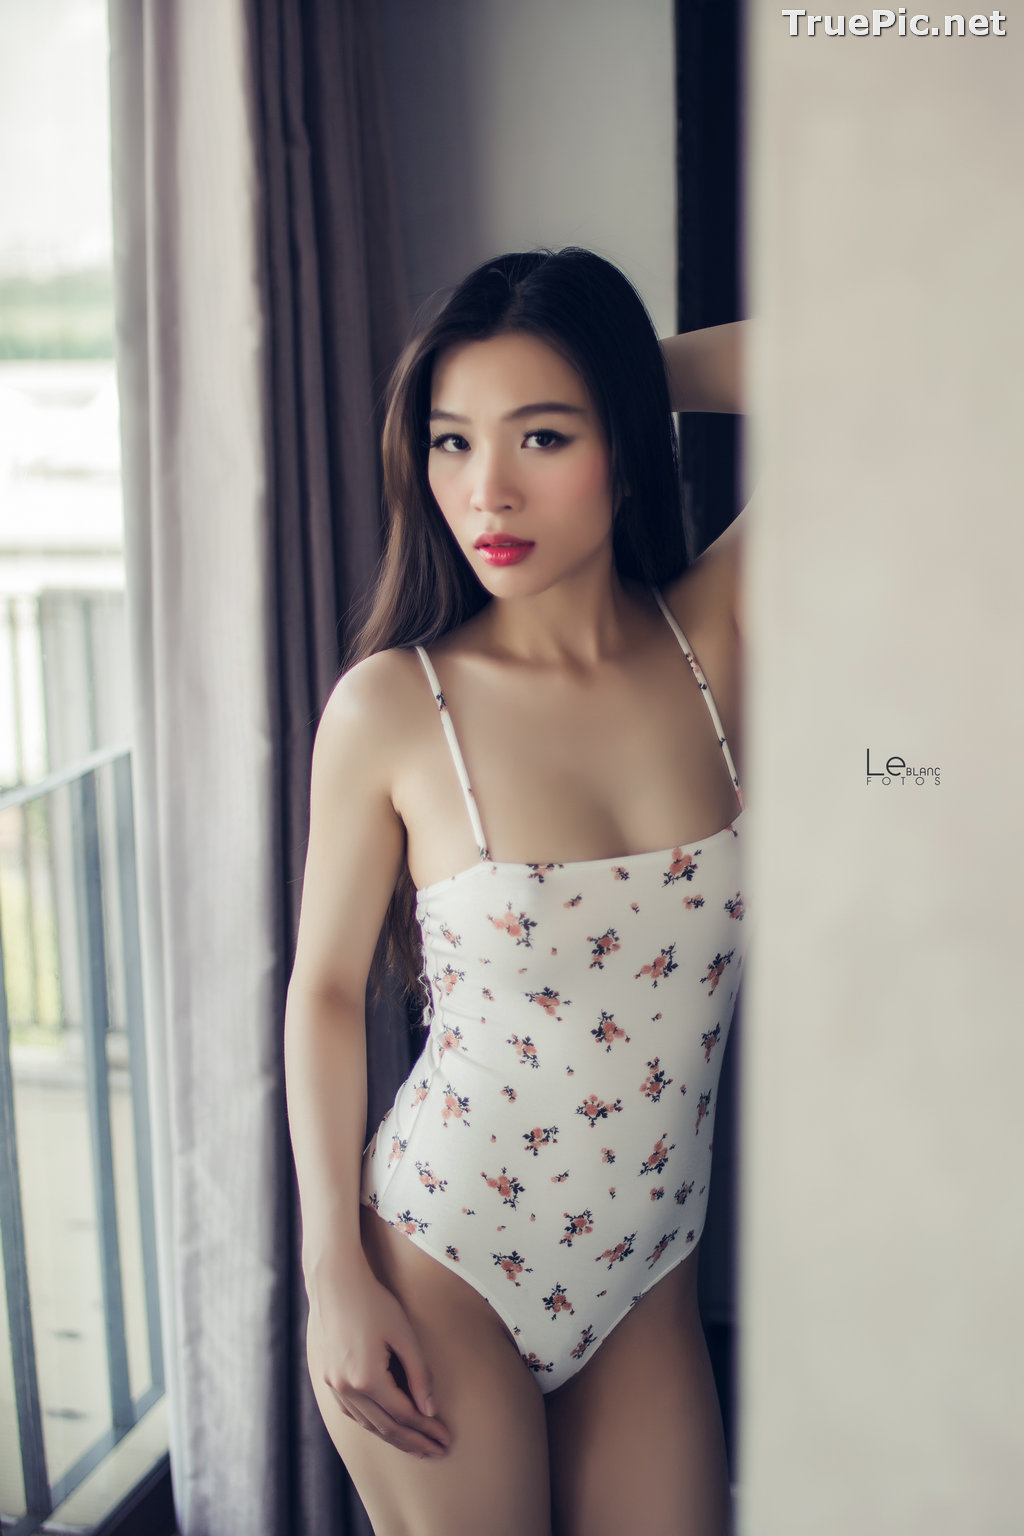 Image Vietnamese Beauties With Lingerie and Bikini – Photo by Le Blanc Studio #11 - TruePic.net - Picture-97